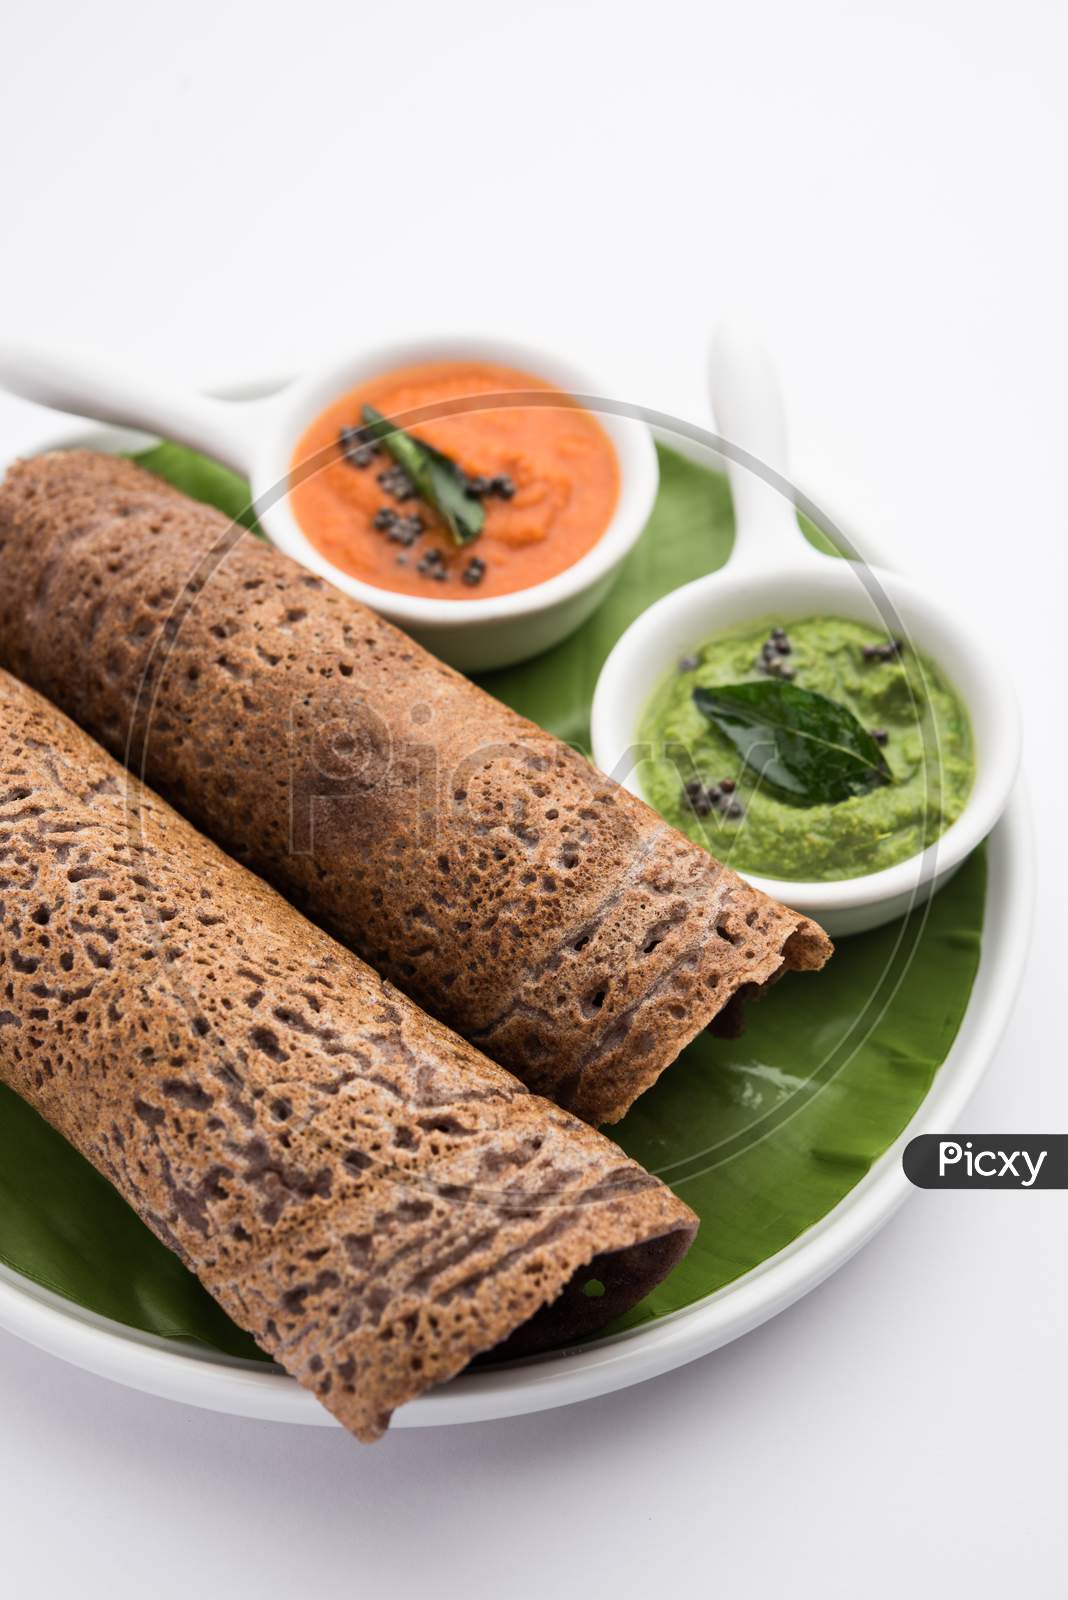 Ragi Dosa Made Using Batter Of Finger Millet Is A Healthy Indian Breakfast Served With Chutney